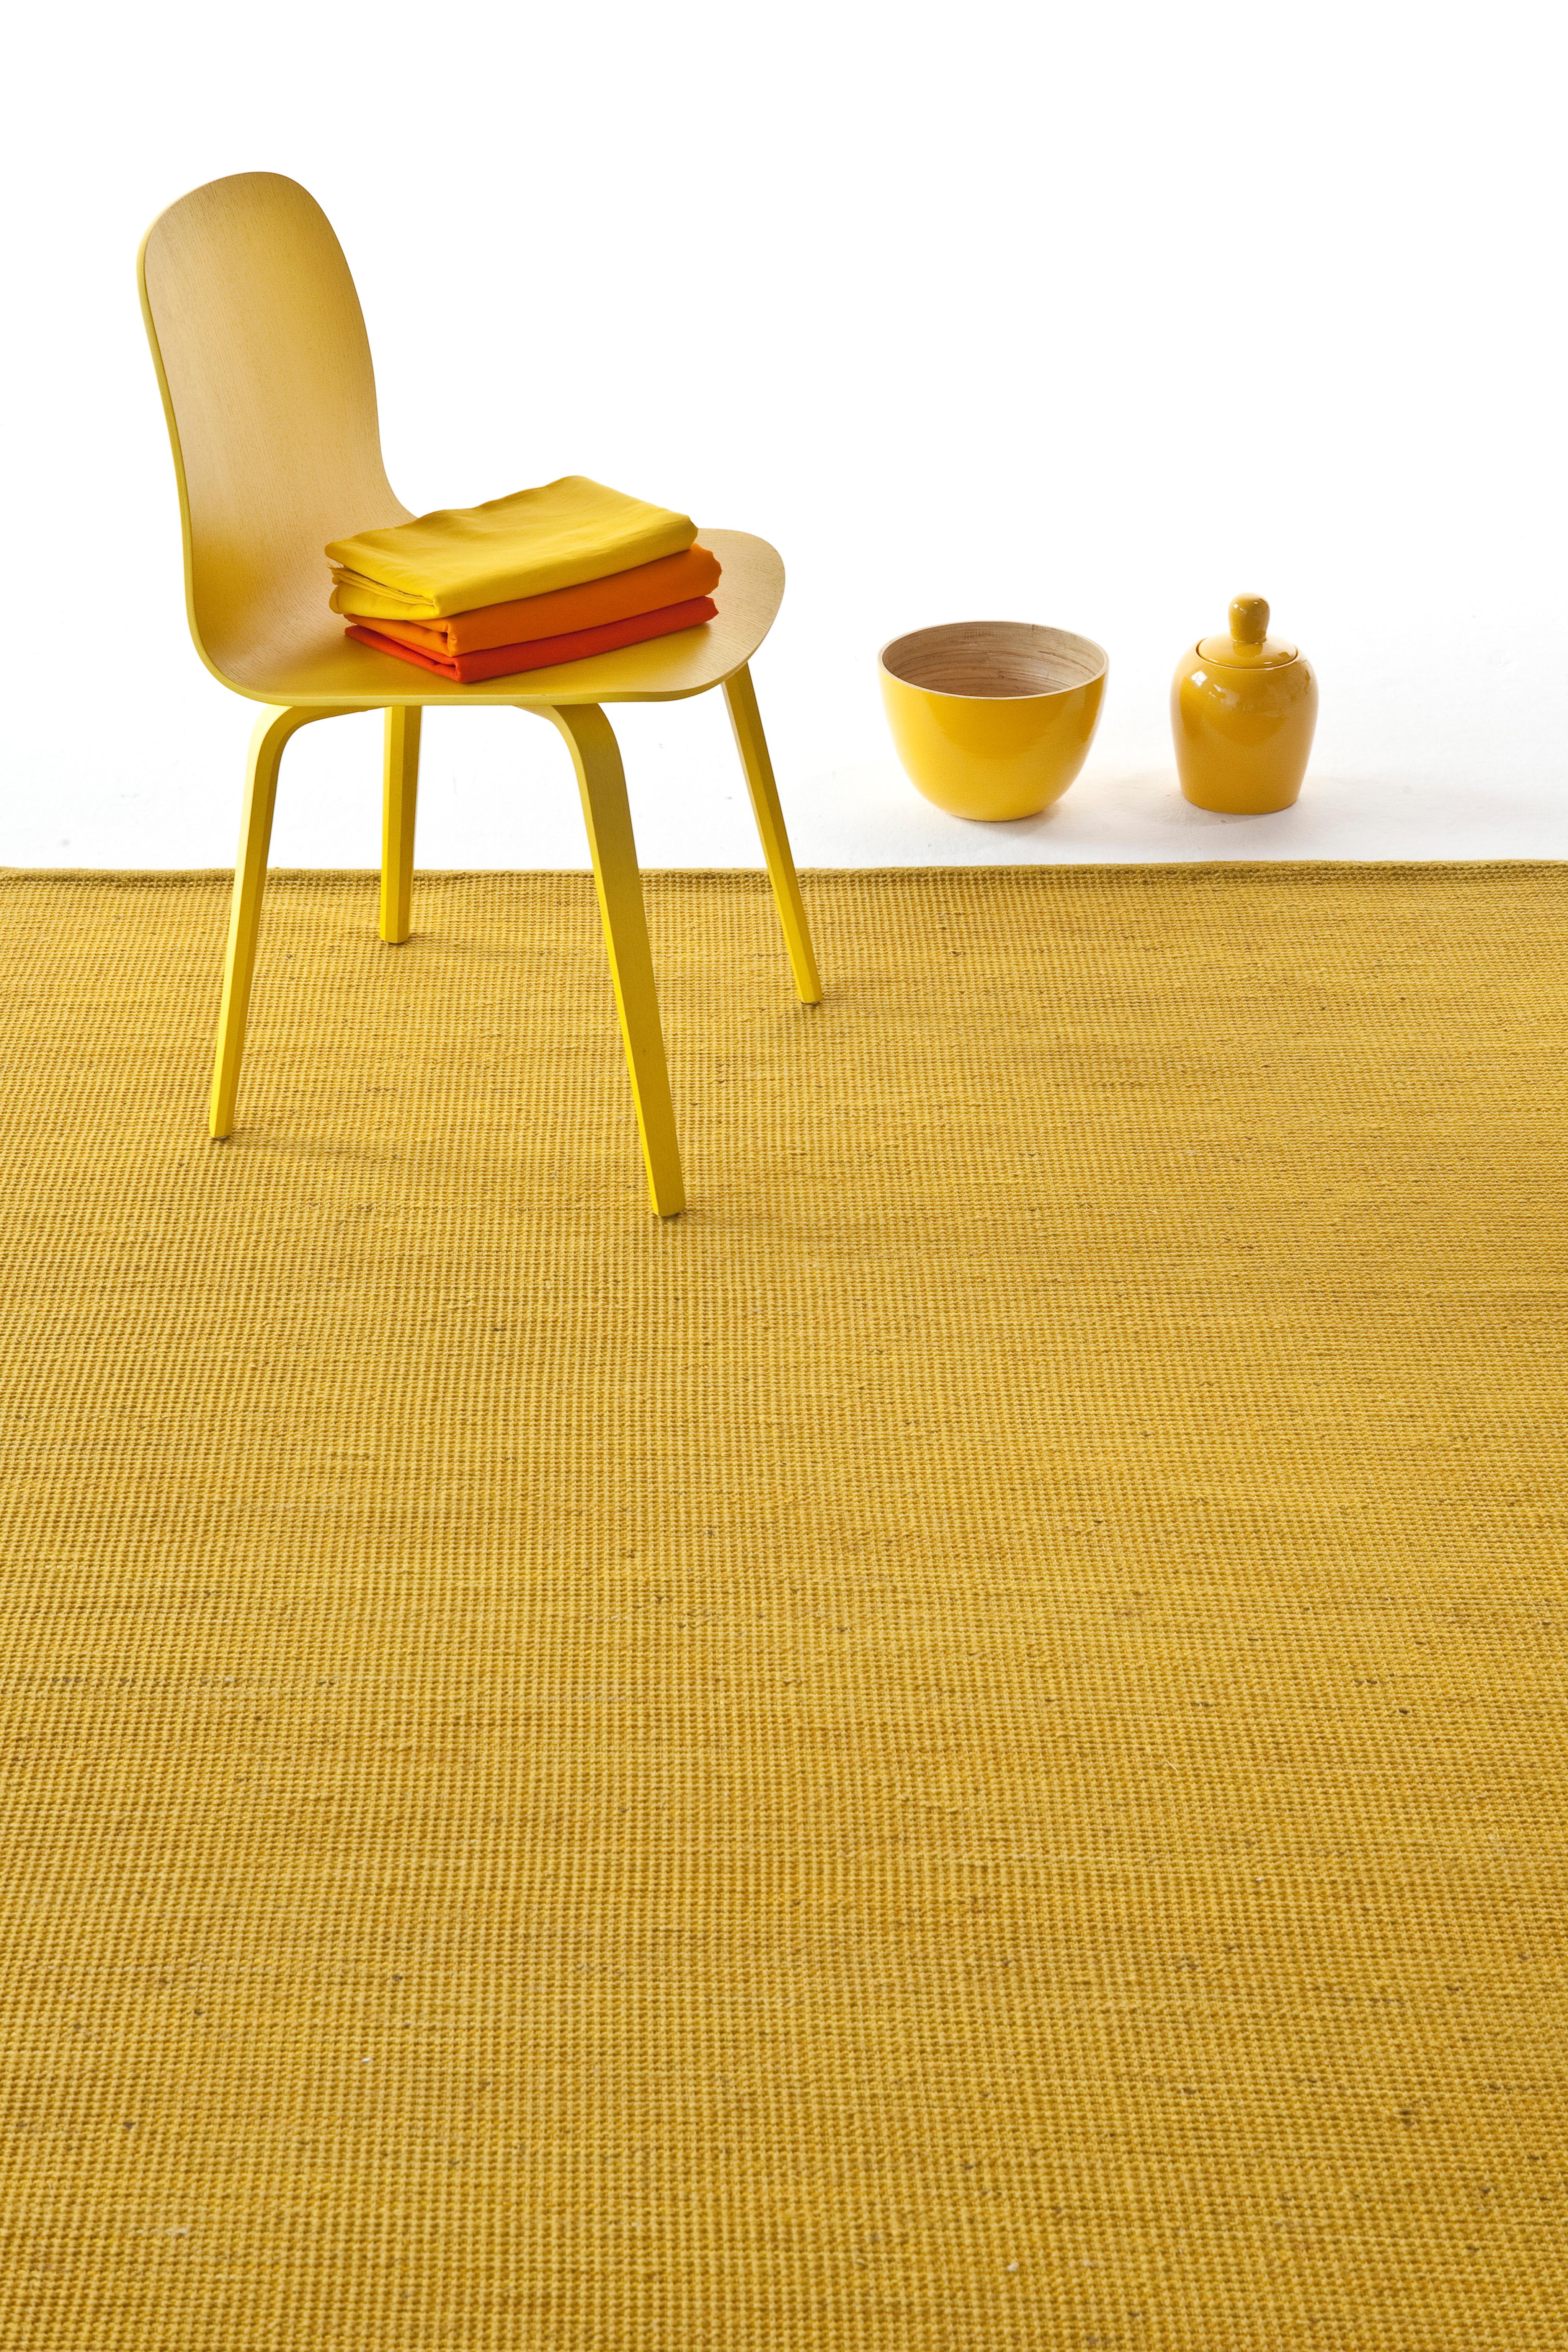 Spanish Large 'Tatami' Rug by Ariadna Miquel and Nani Marquina for Nanimarquina For Sale